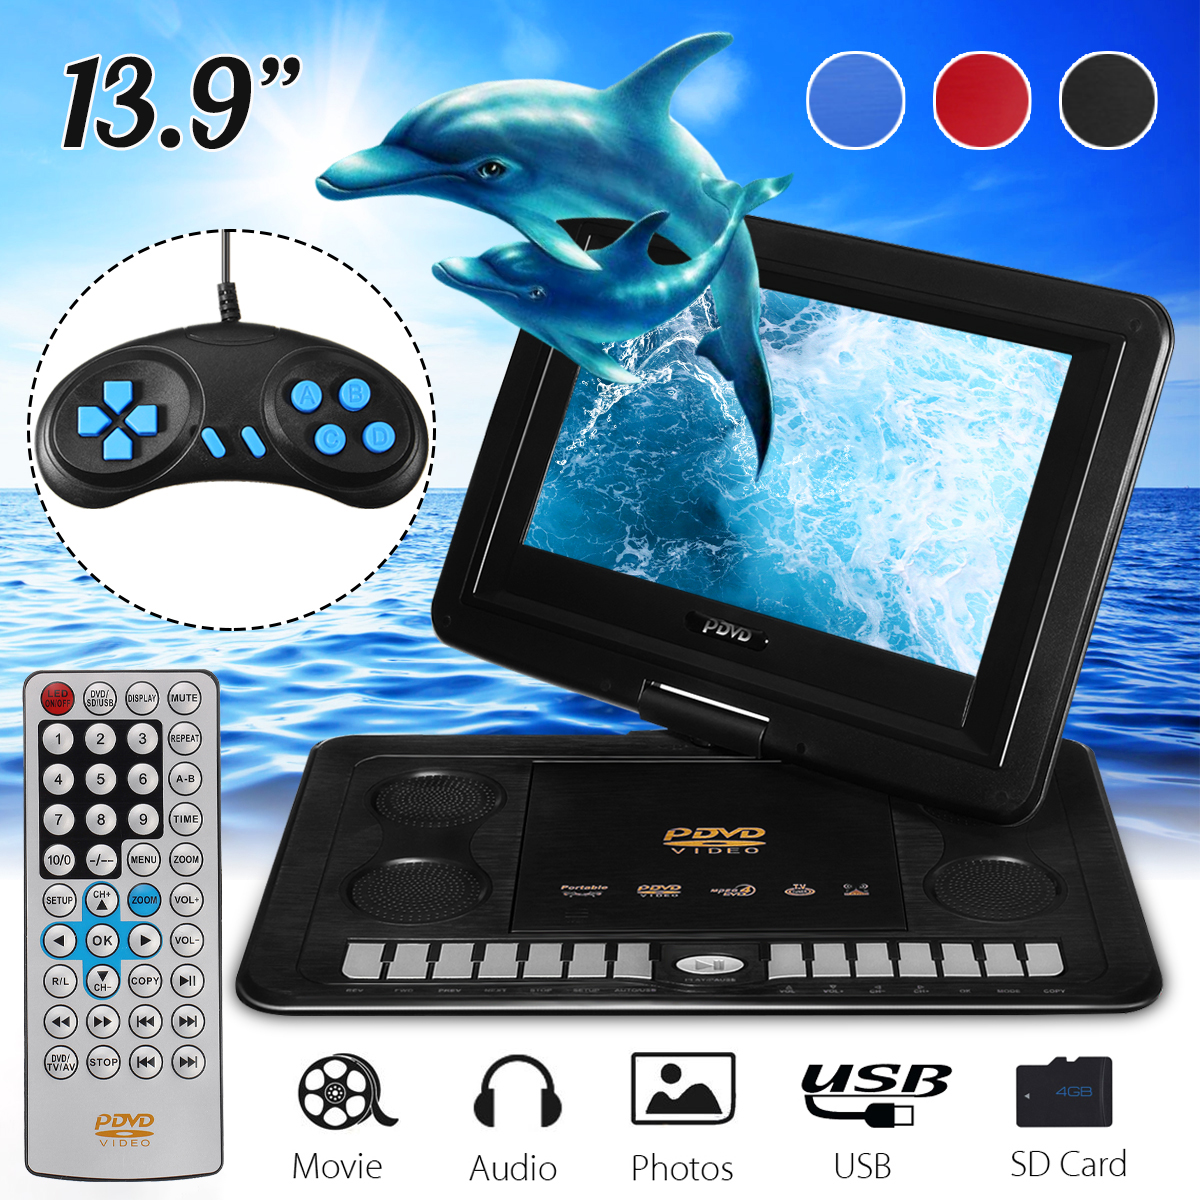 138-Inch-Portable-Television-DVD-VCD-EVD-CD-Player-EVD-TV-USB-Game-270deg-Rotation-LCD-Screen-with-R-1934262-1